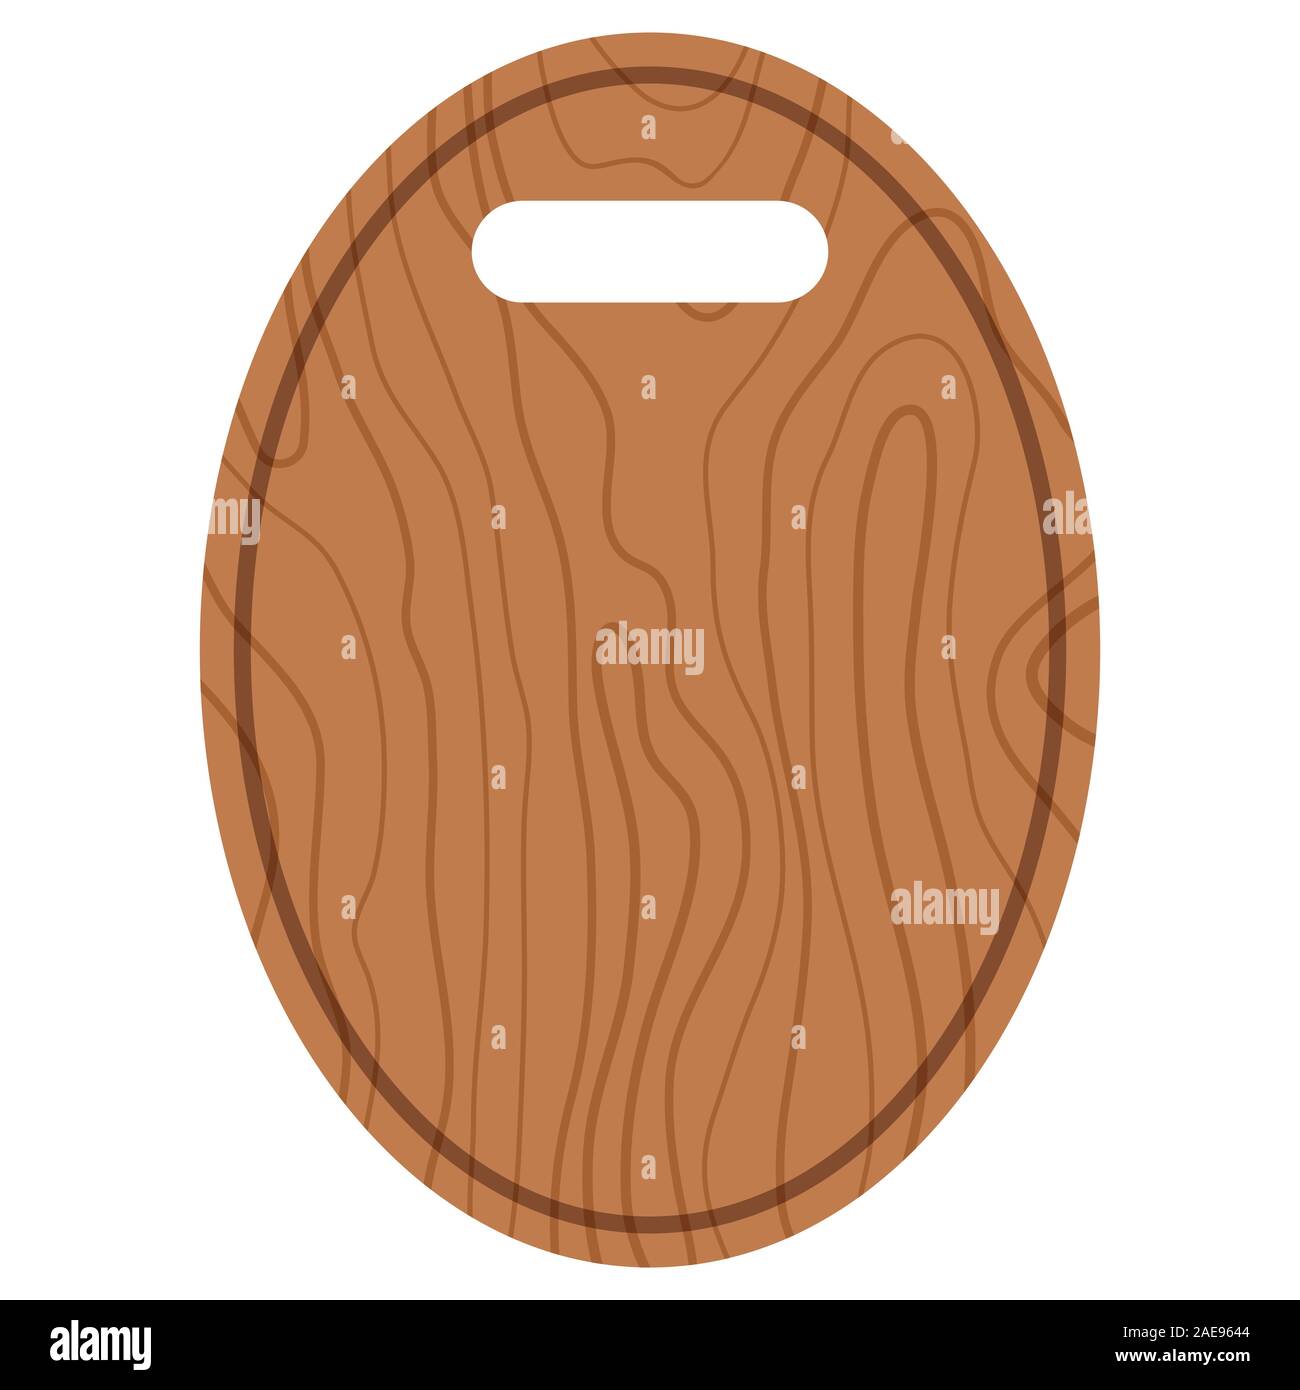 Kitchen oval board with hole flat design cartoon style icon vector illustration isolated on white background. Stock Vector